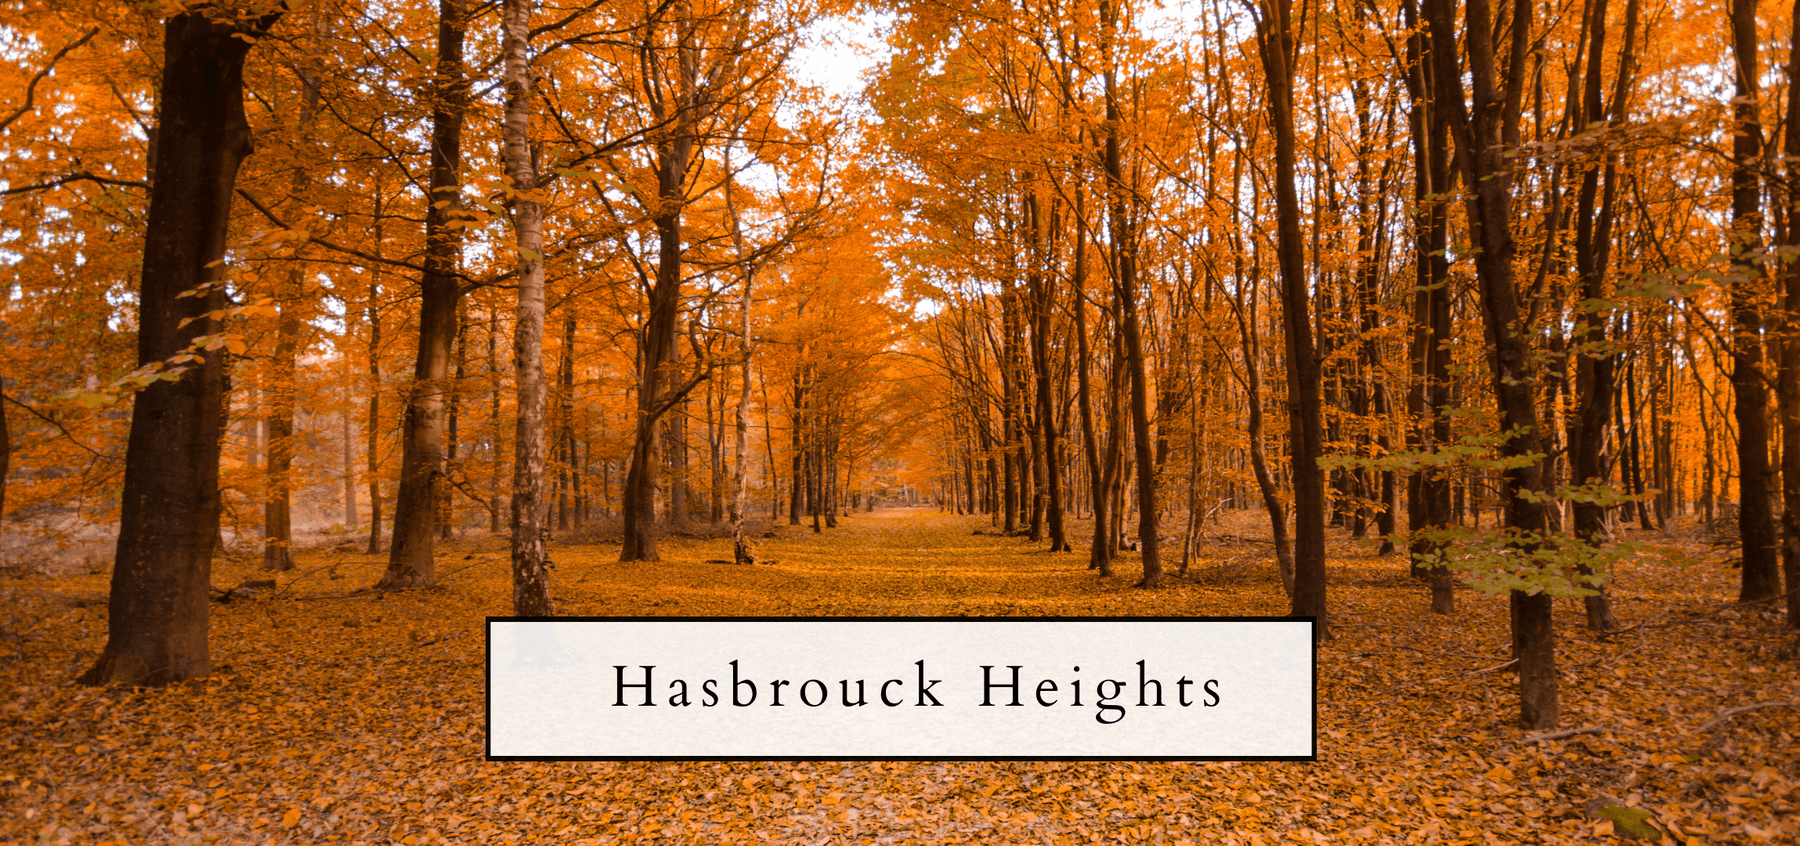 Fall Fun in Hasbrouck Heights: A Season of Delight - Modern Memory Design Picture frames - NJ Frame shop Custom framing